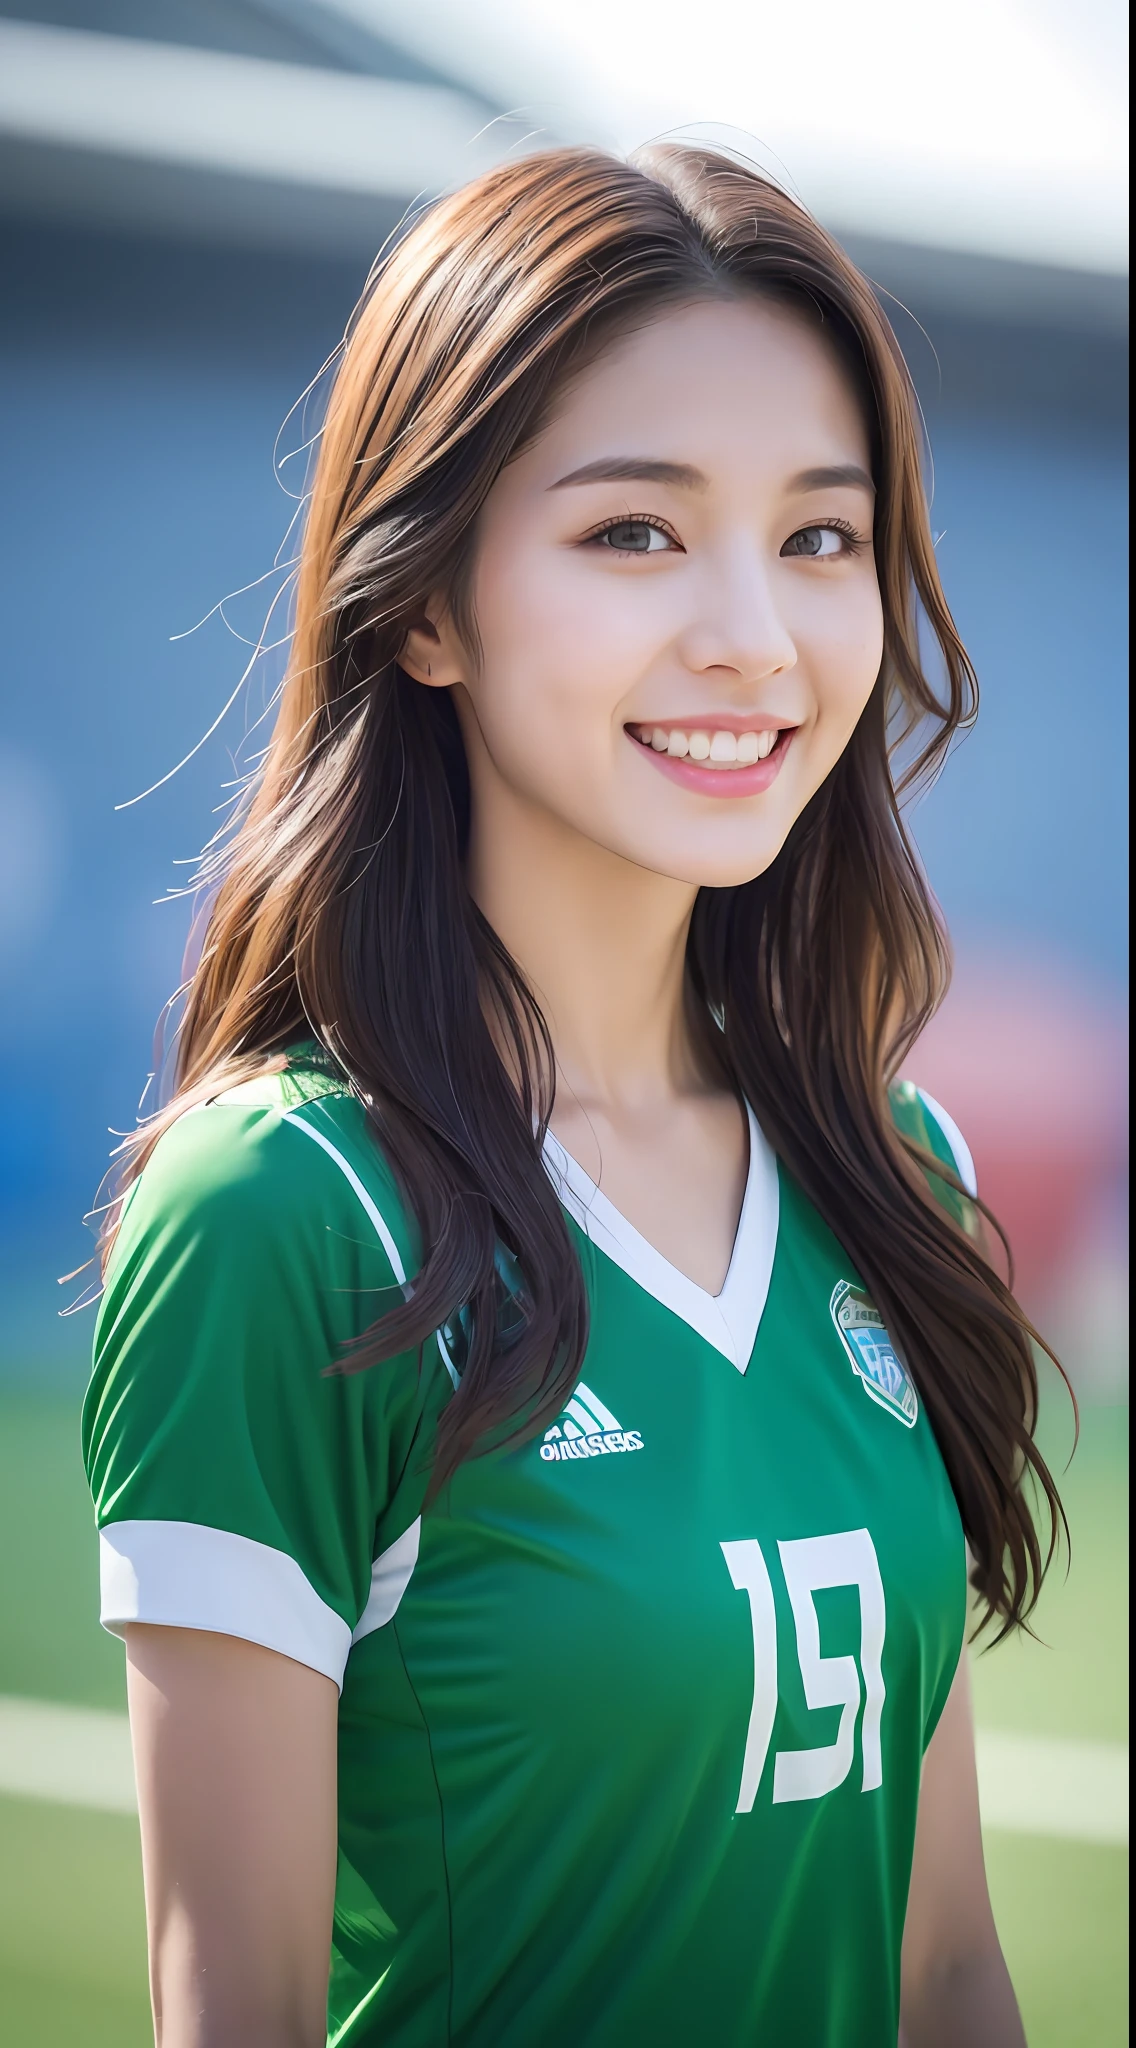 ((Best Quality, 8K, Masterpiece: 1.3)), 1 girl, smile, full body, slim face, pretty woman, (dark brown hair), sportswear :1.1, super detailed face, detailed eyes, double eyelids, blurred background, slim face, football field background, water cube,